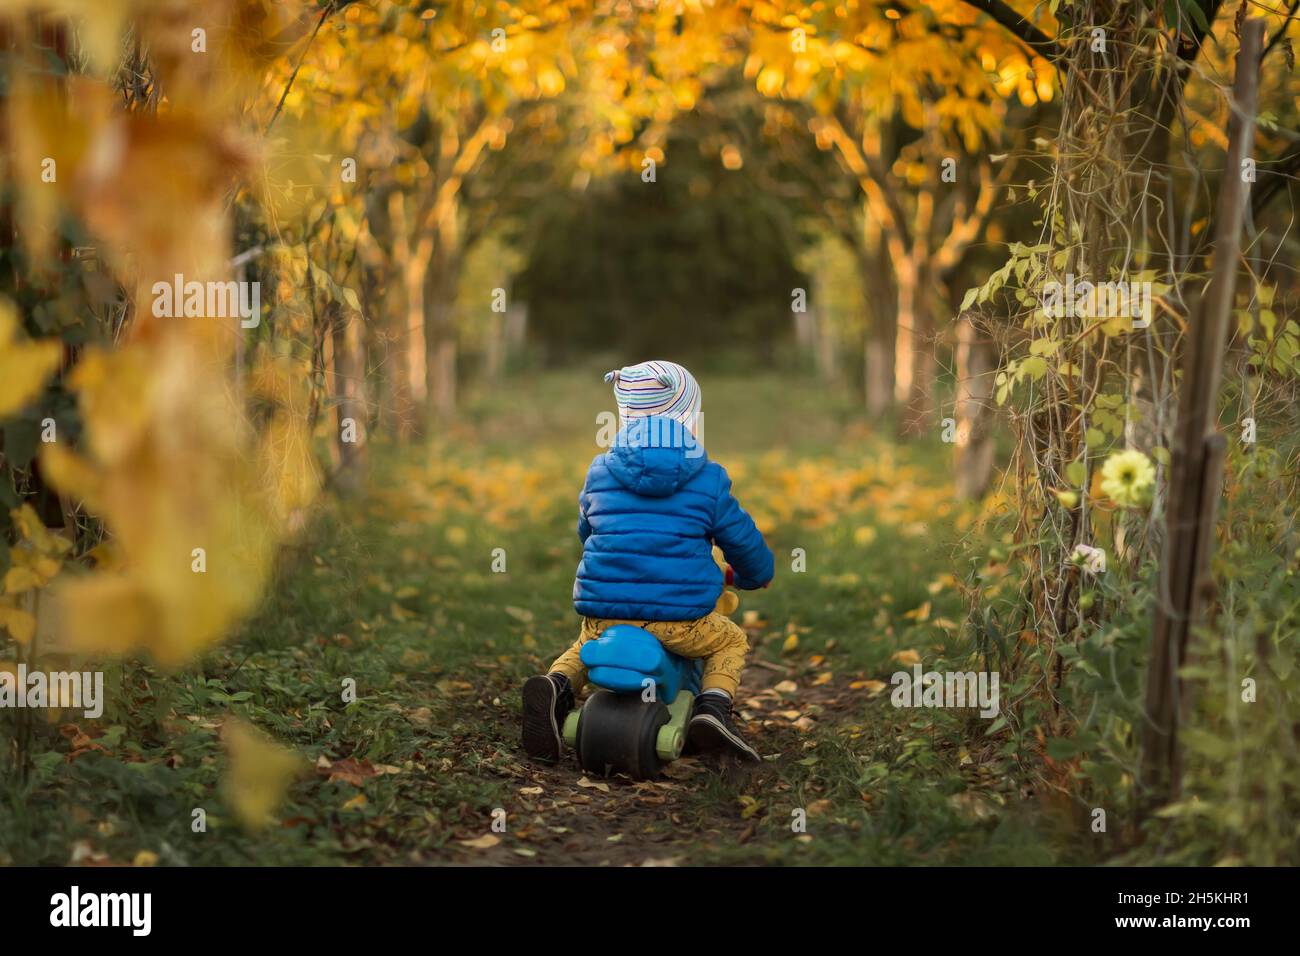 Small boy in blue jacket riding plastic toy motorbike in garden Stock Photo